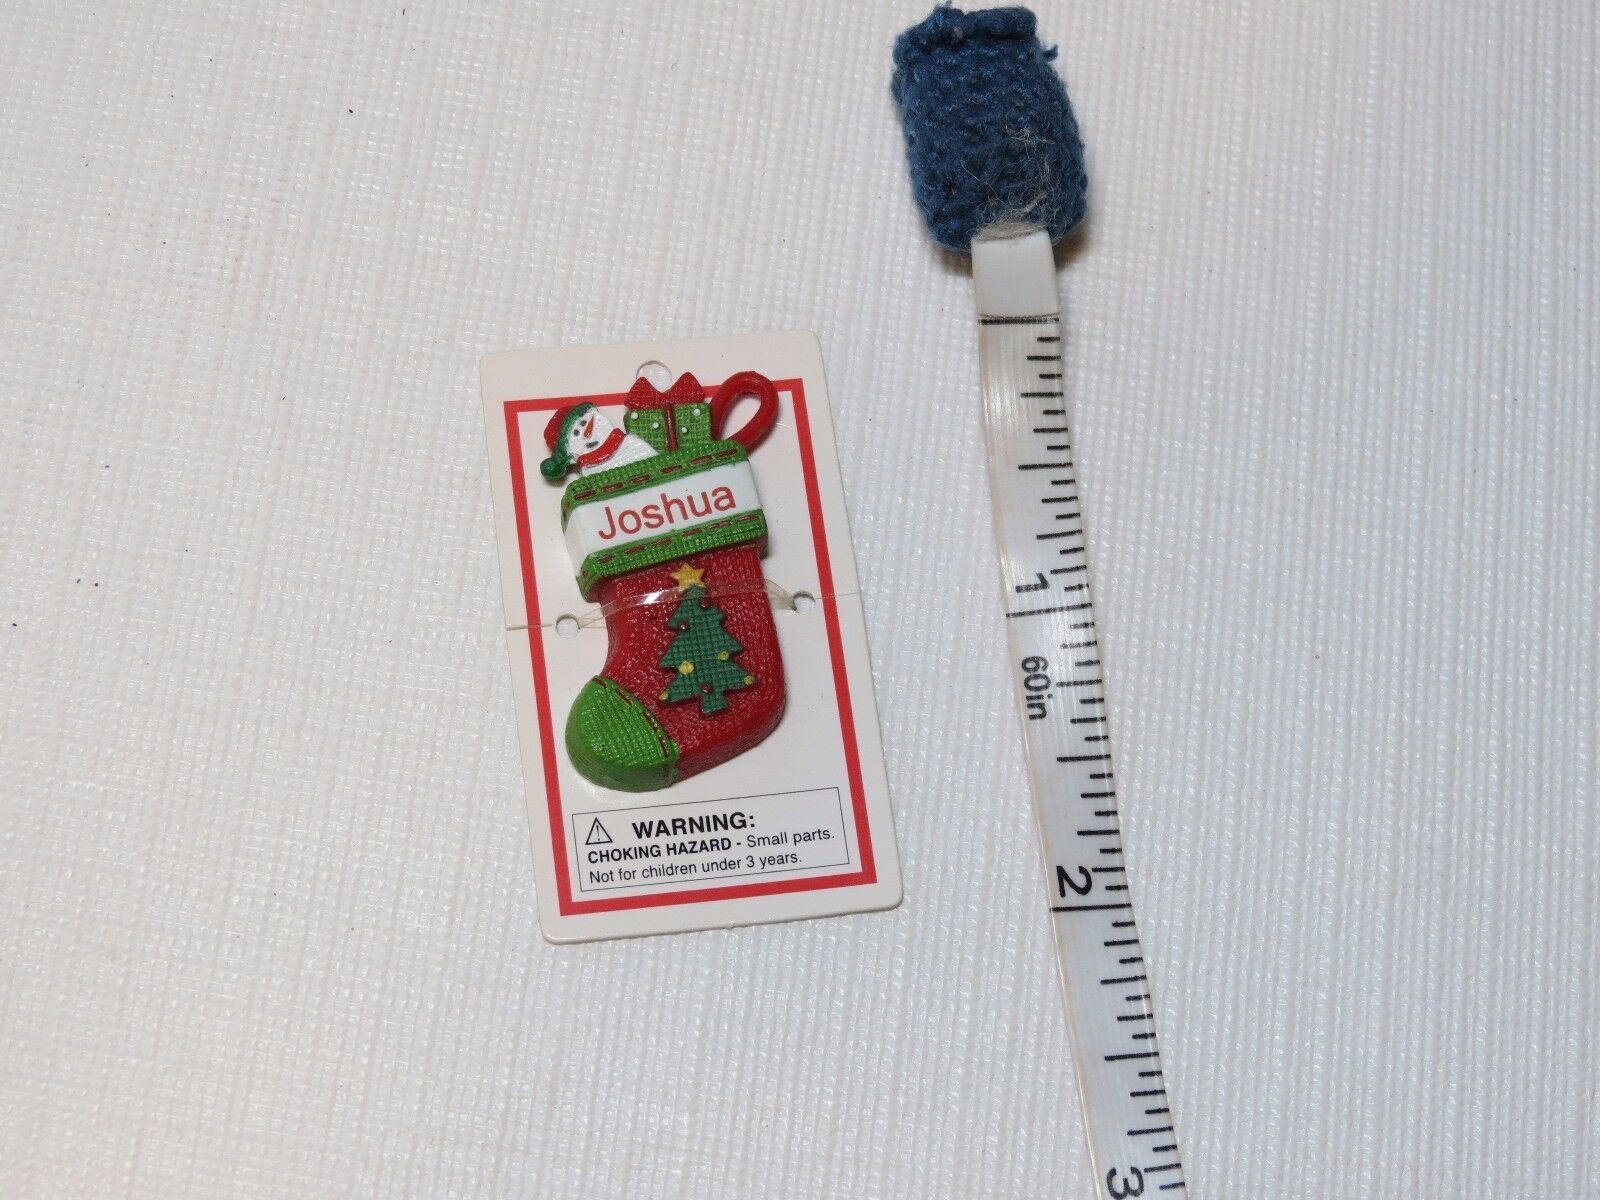 Primary image for Itsy Bitsy Stocking Ornament name Joshua MINI Ganz personalized Christmas gift